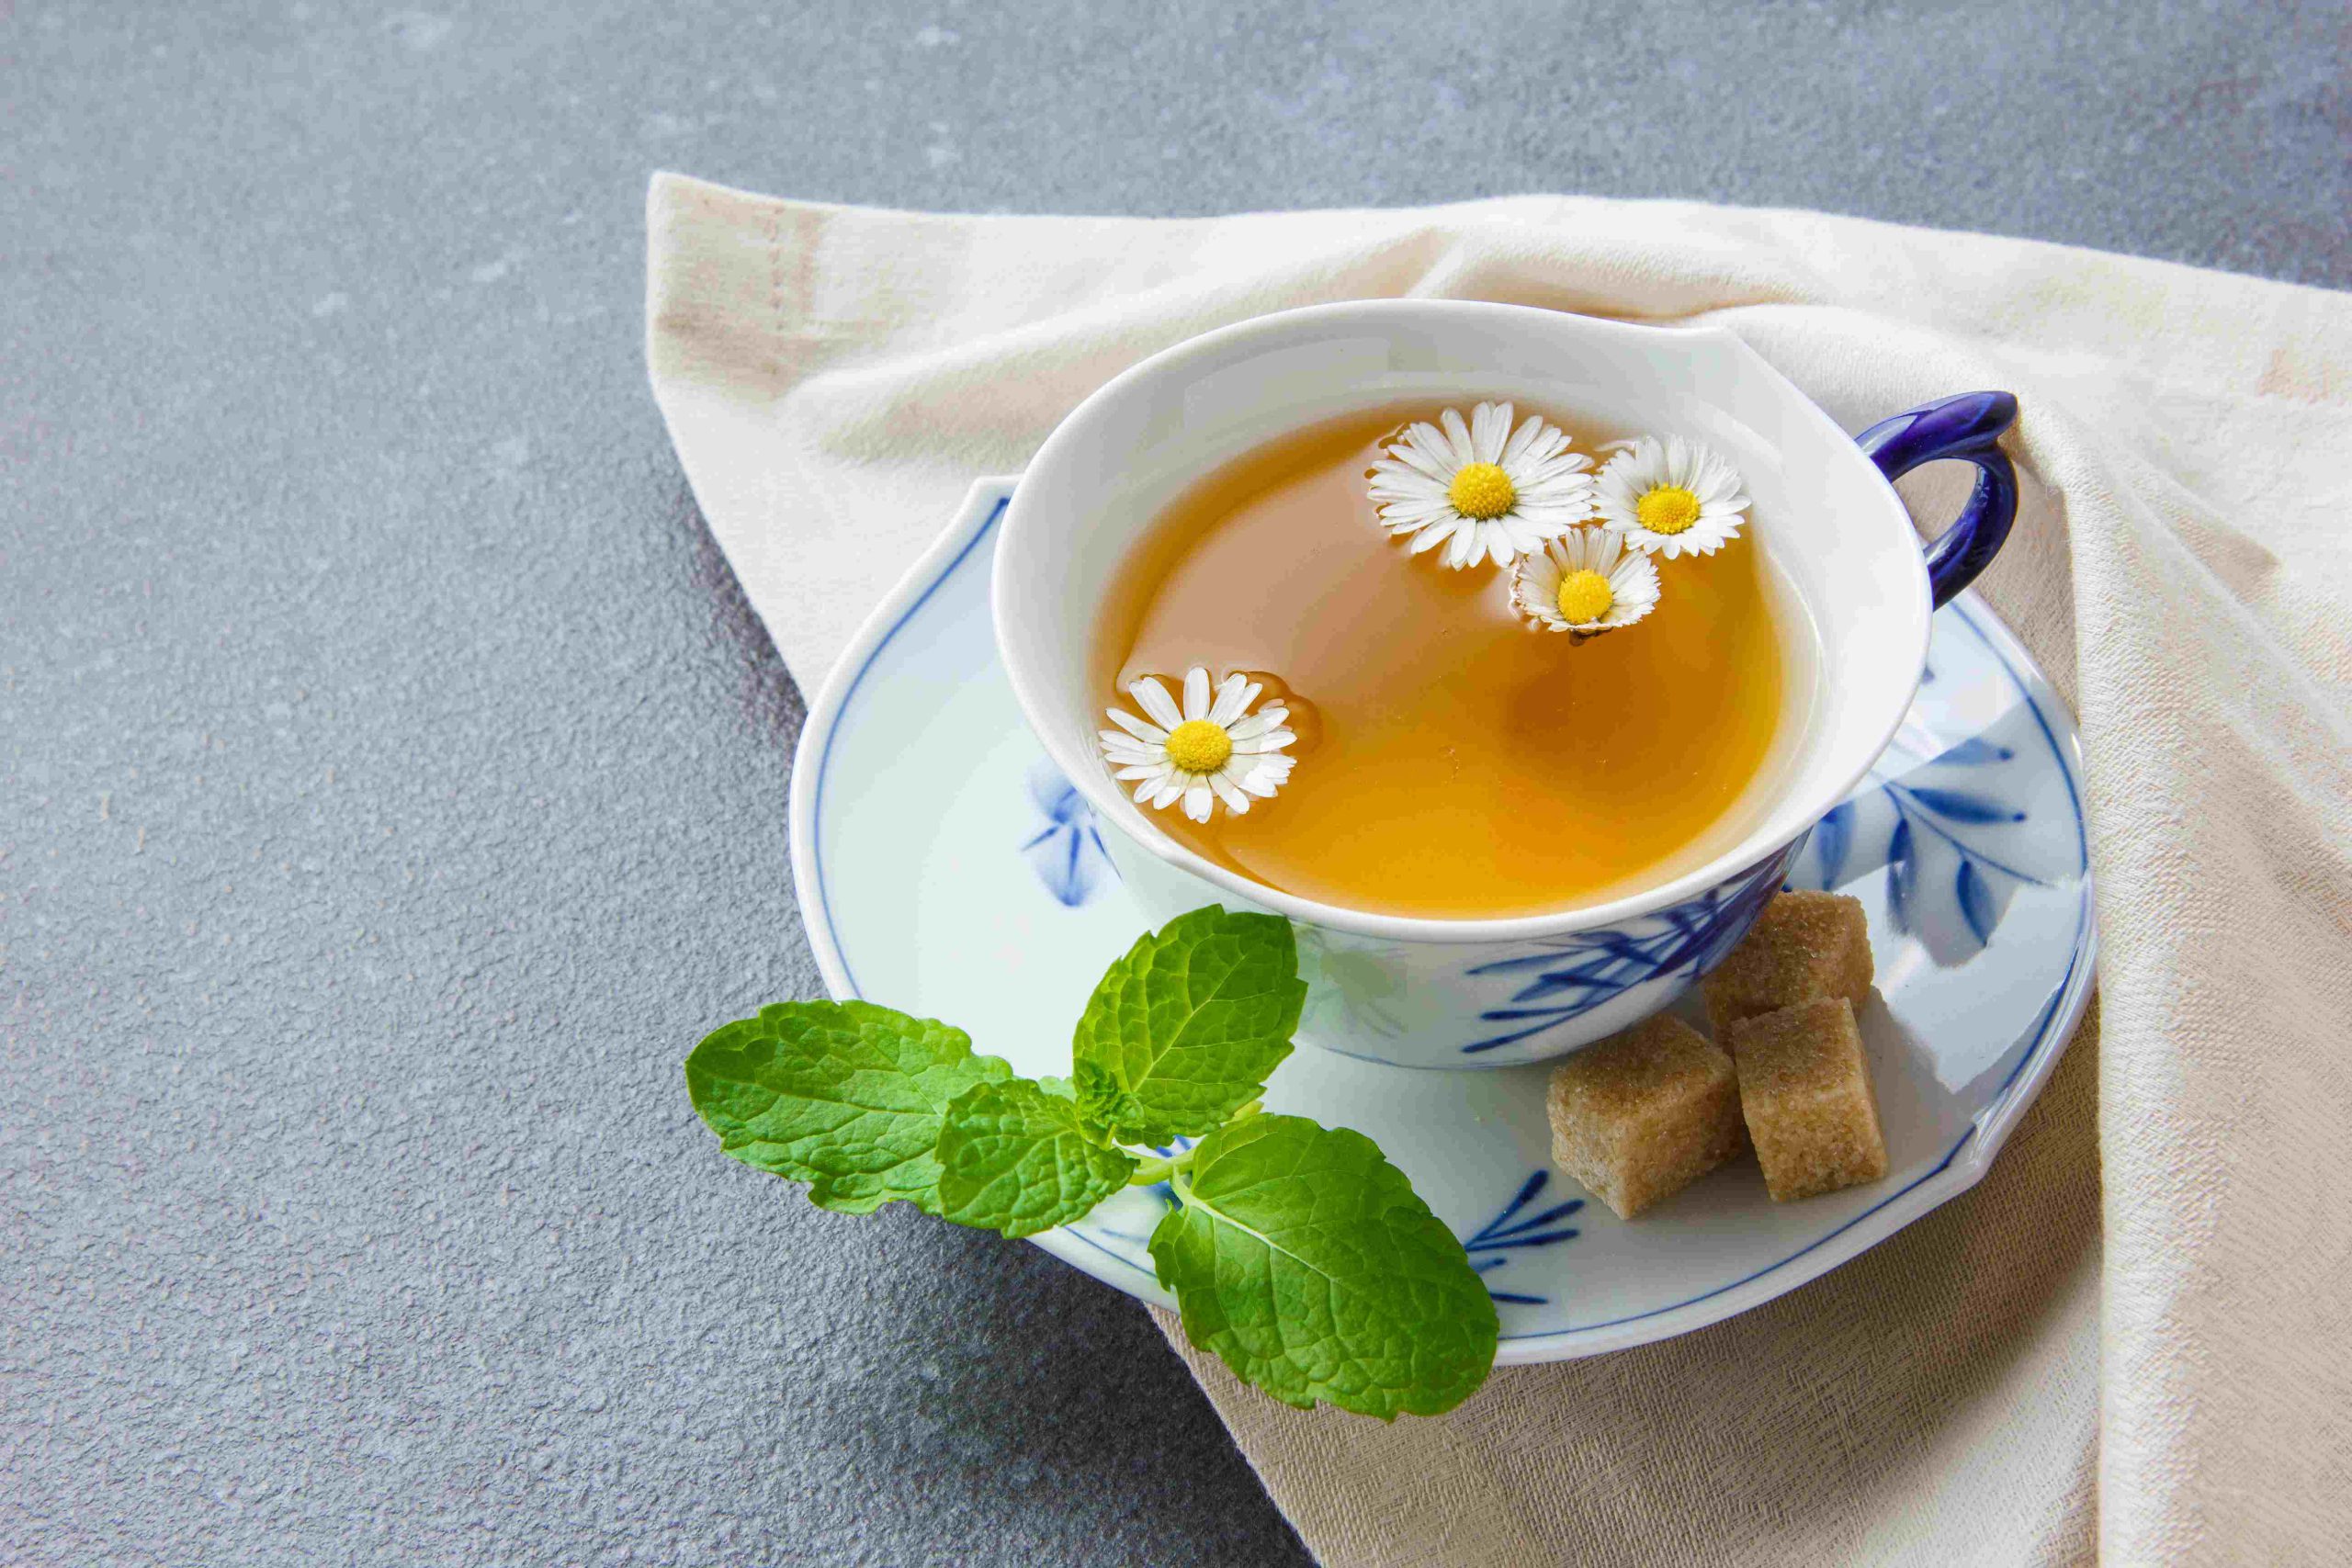 cup-chamomile-tea-with-sugar-cubes-leaves-high-angle-view-cloth